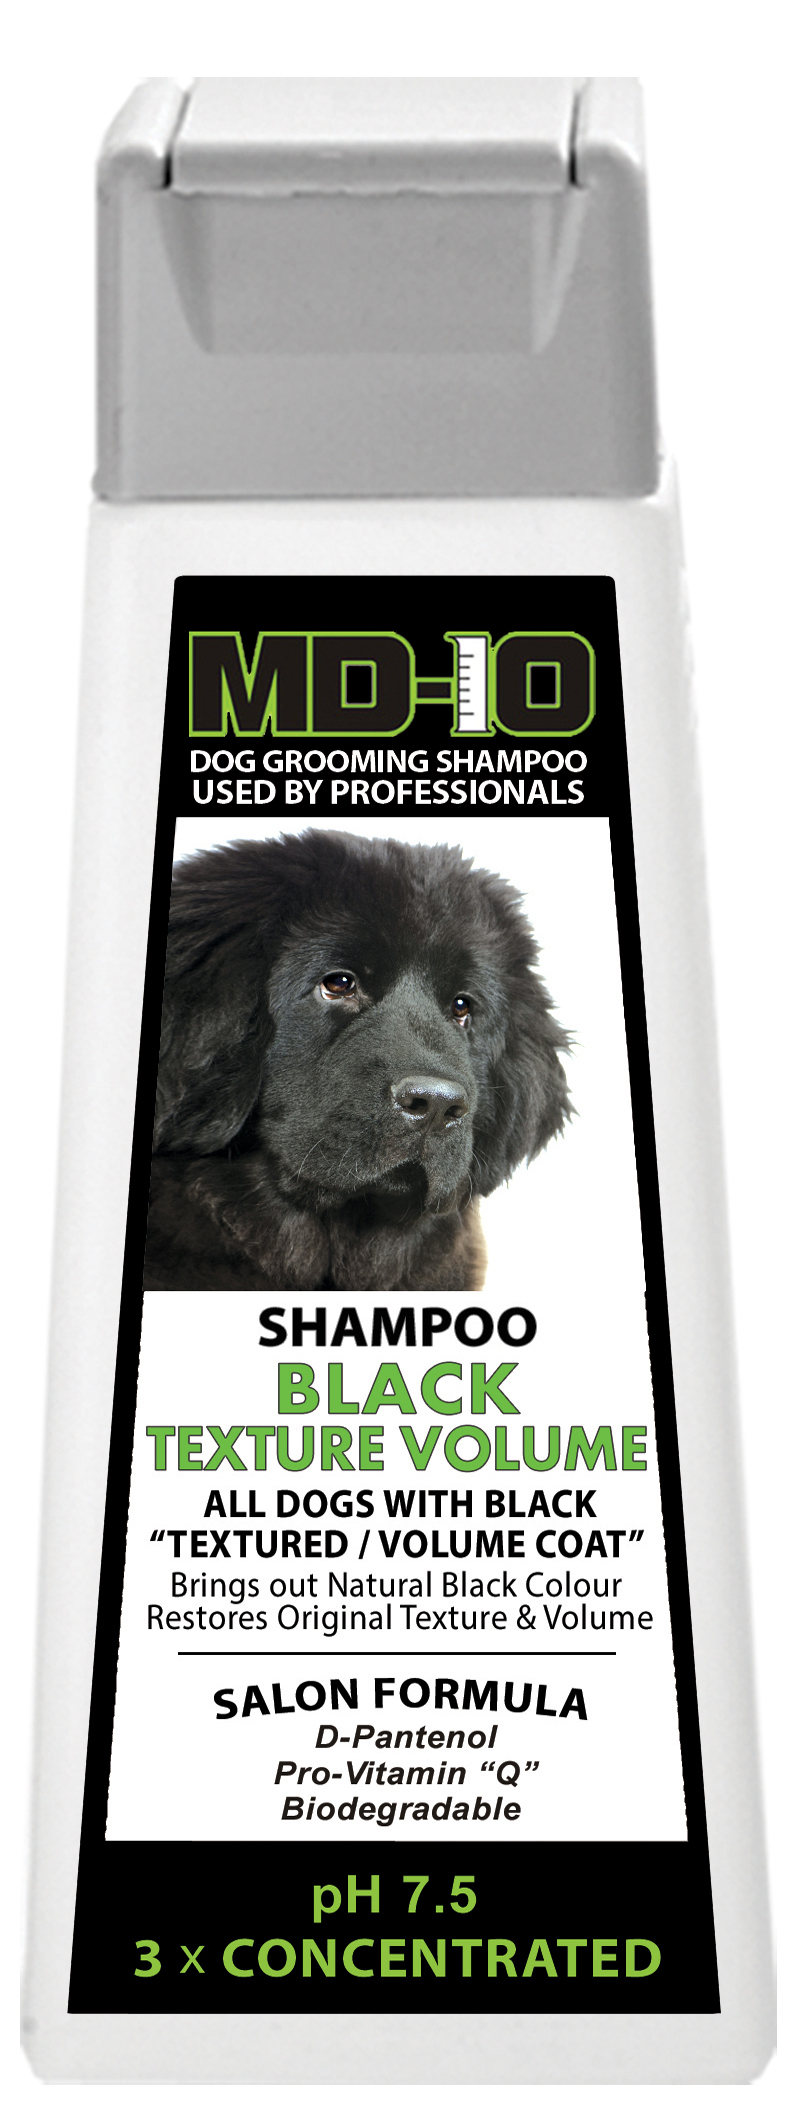 Shampoing MD-10 Black Texture